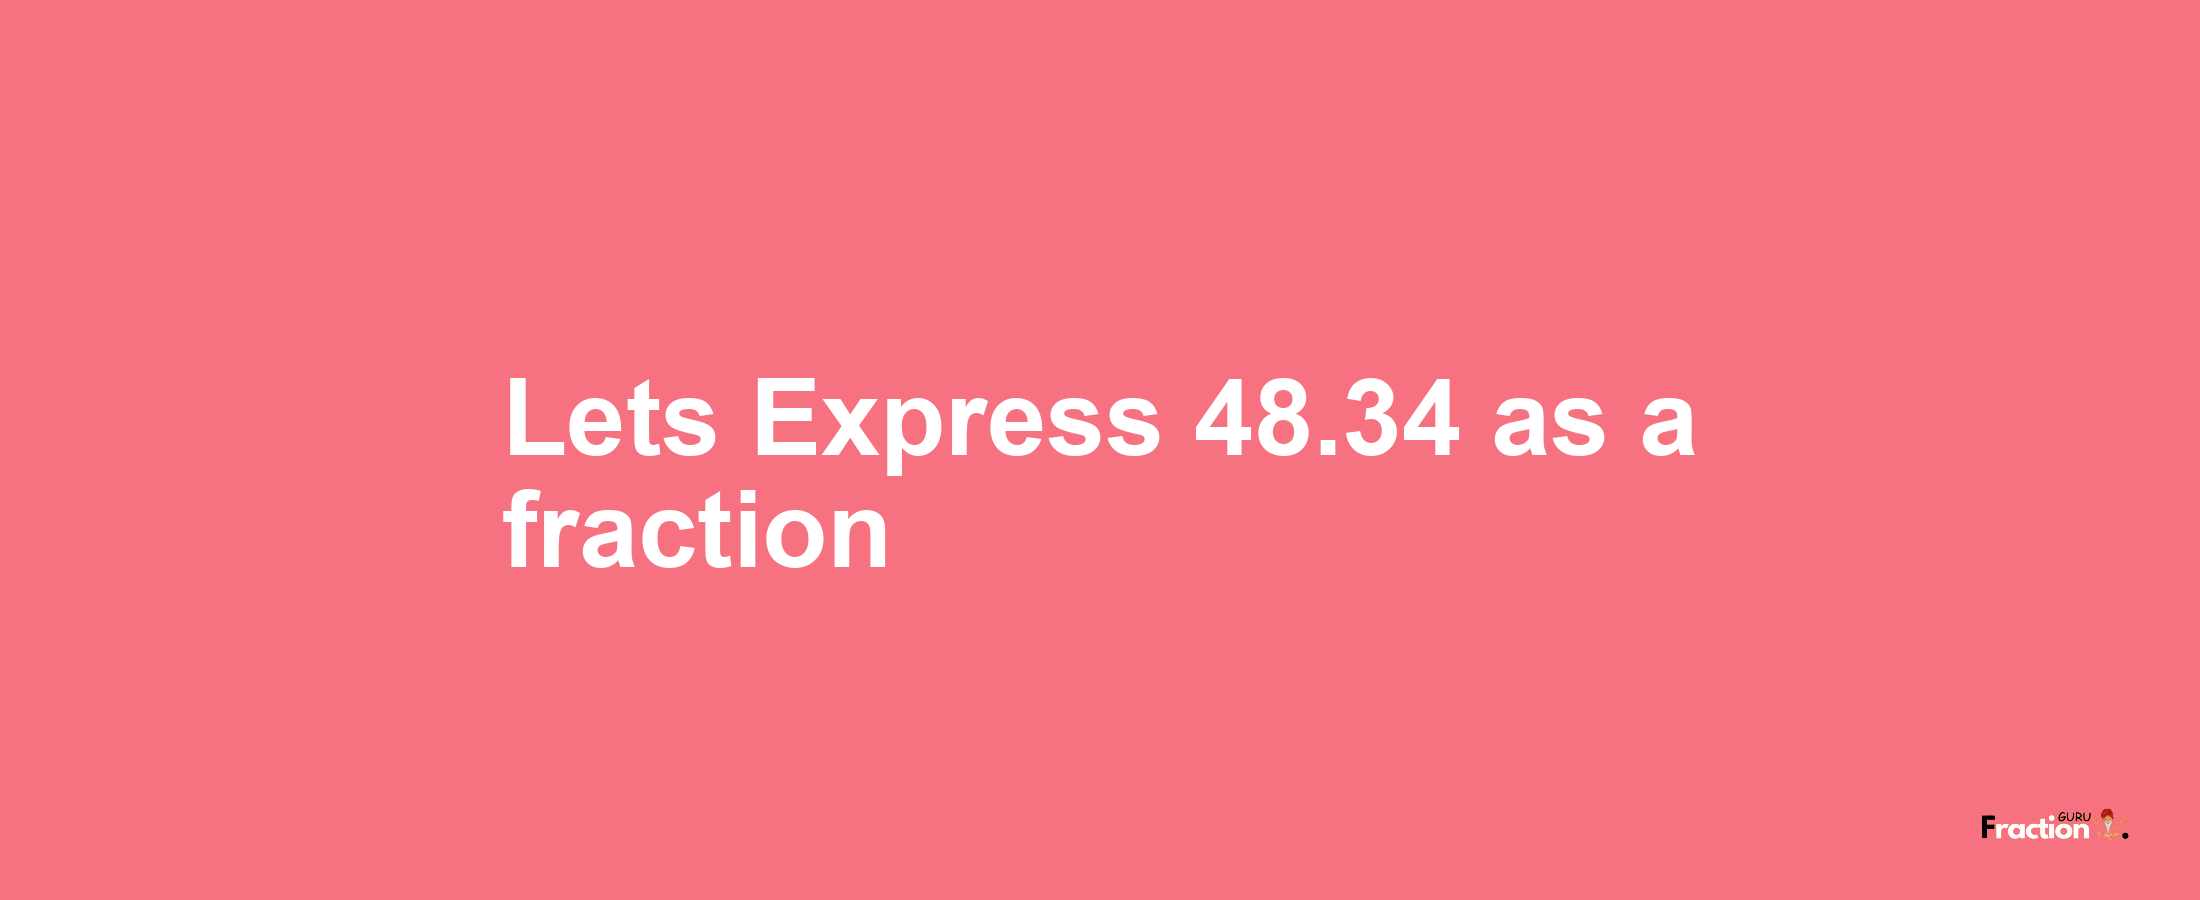 Lets Express 48.34 as afraction